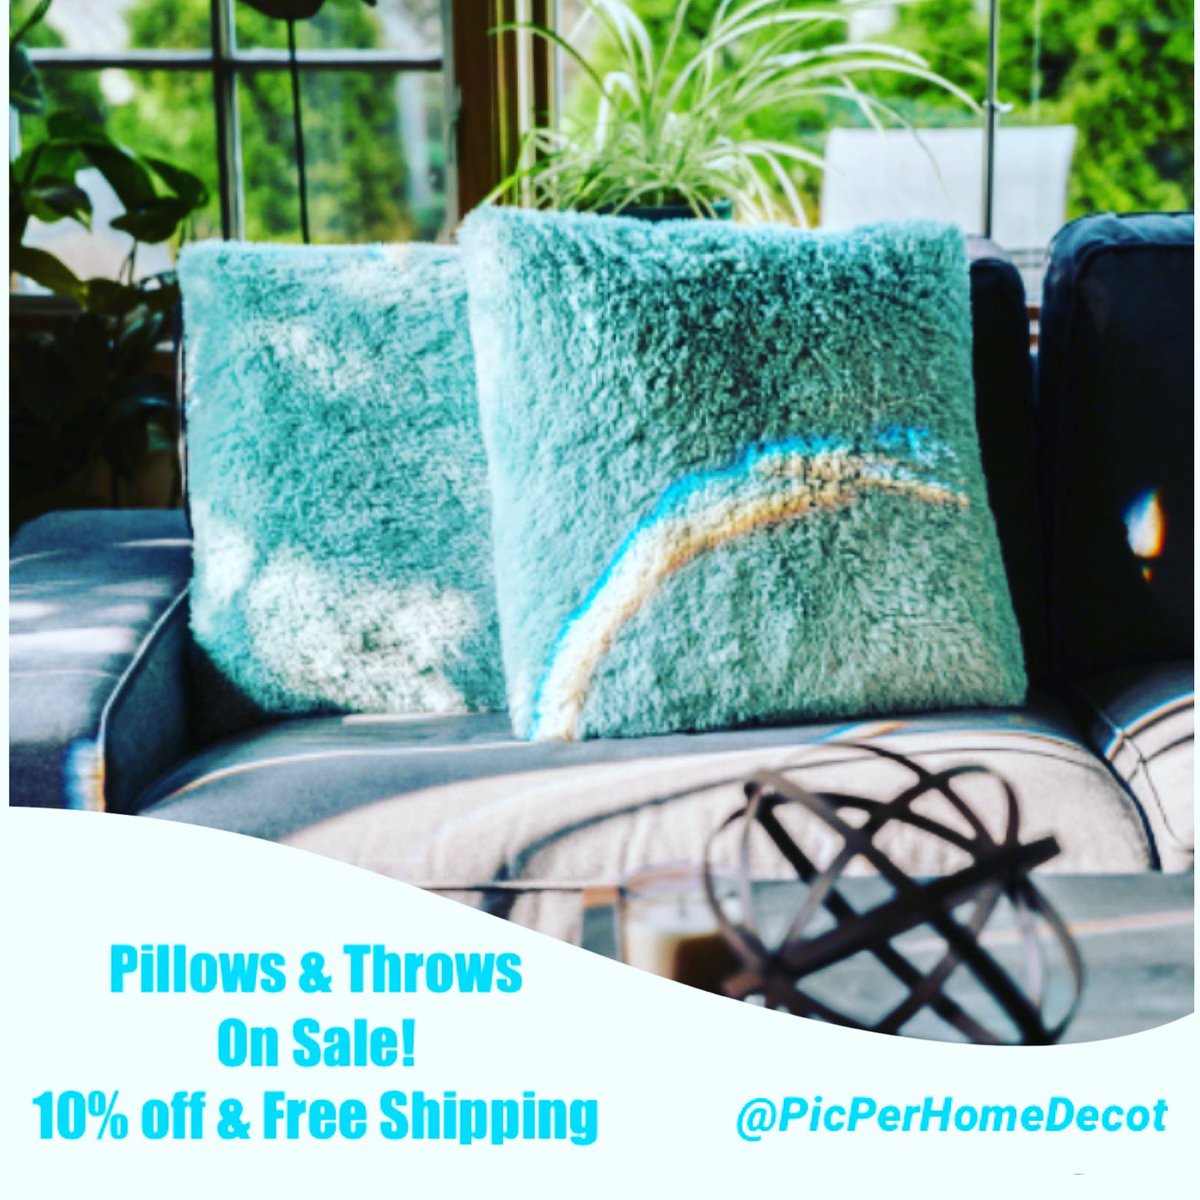 Let’s have a Pillow Fight! All Decorative Pillows & Throws on sale. Link in Bio. 
#decorativepillow #cushioncover #cushioncovershabby #homedecorbudget #homedecorblog #homedecorlovers #covercushion #homedecordiy #pictureperfecthomedecor #sofadecor #sofaaccessories #homeliving